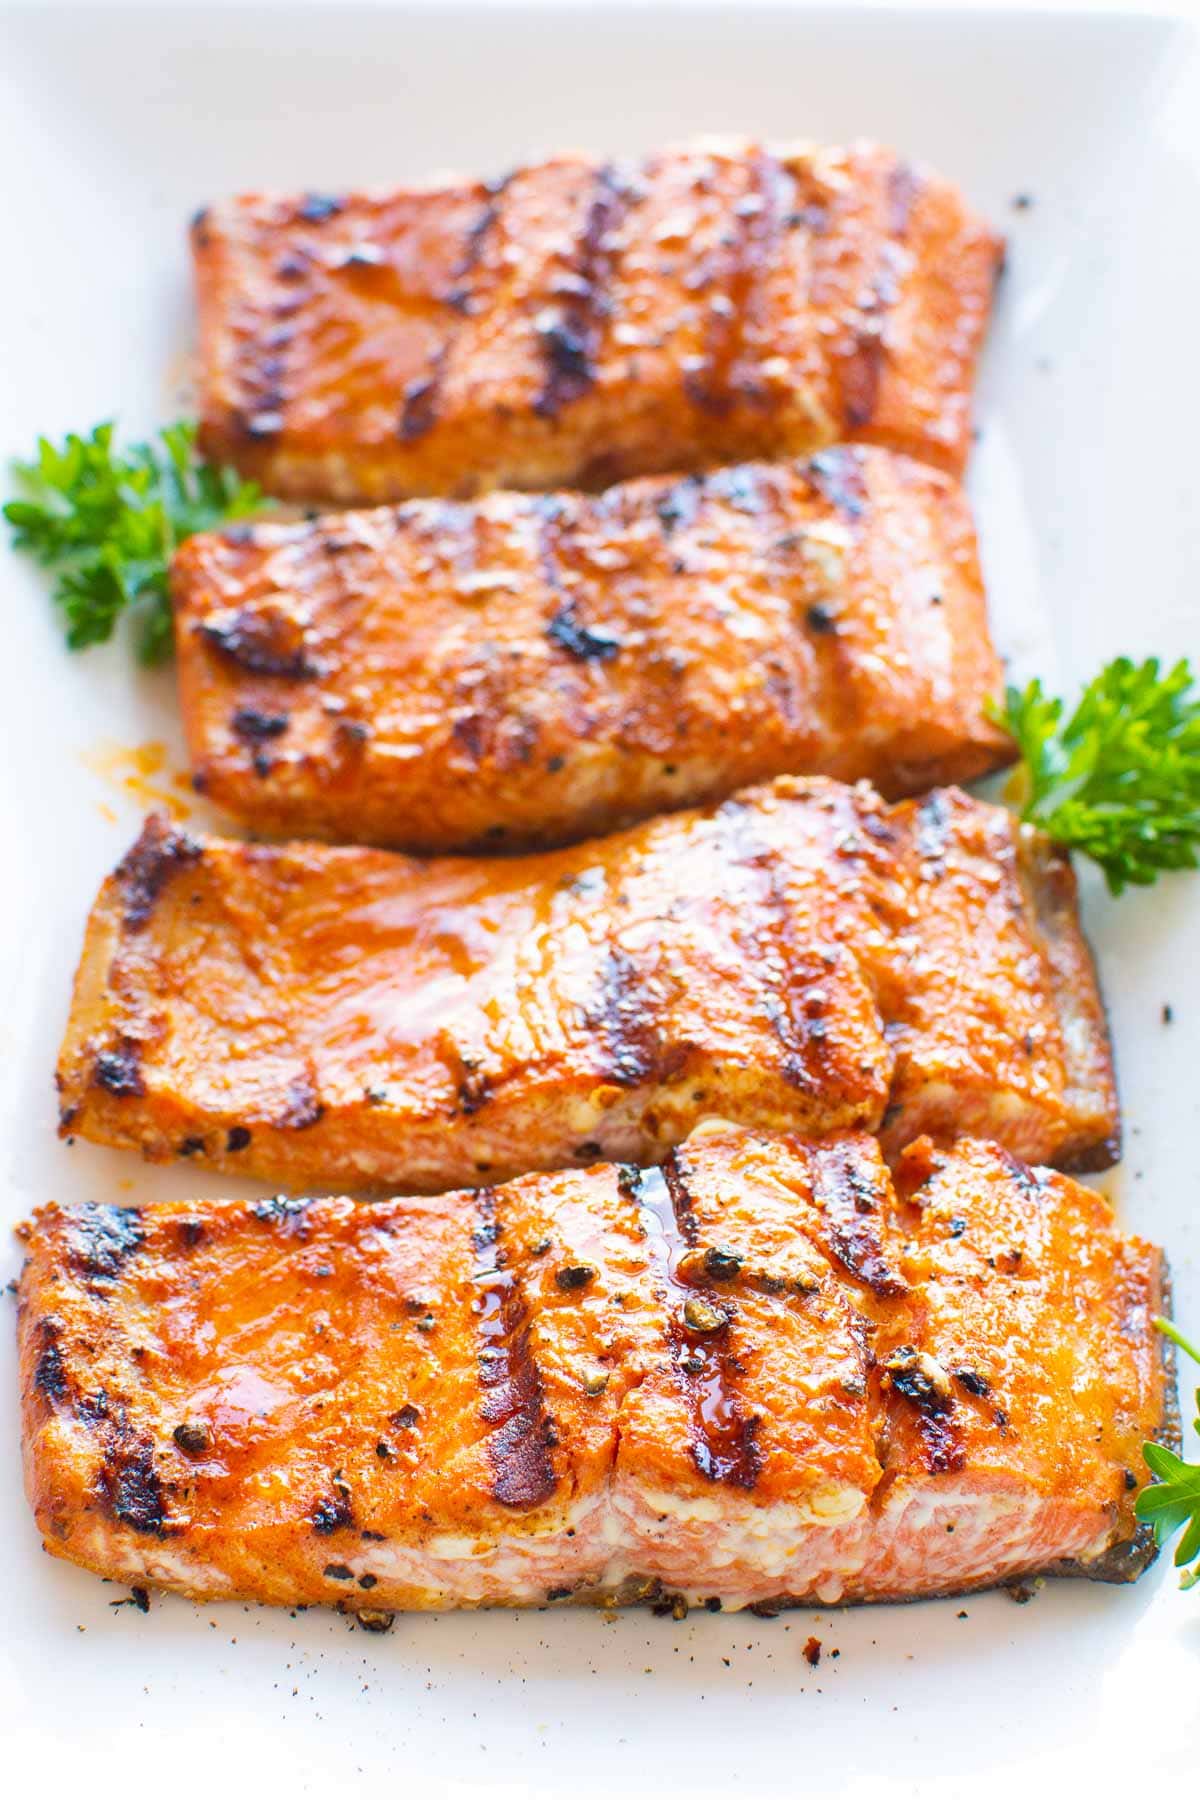 Grilled salmon slices on white plate with parsley.